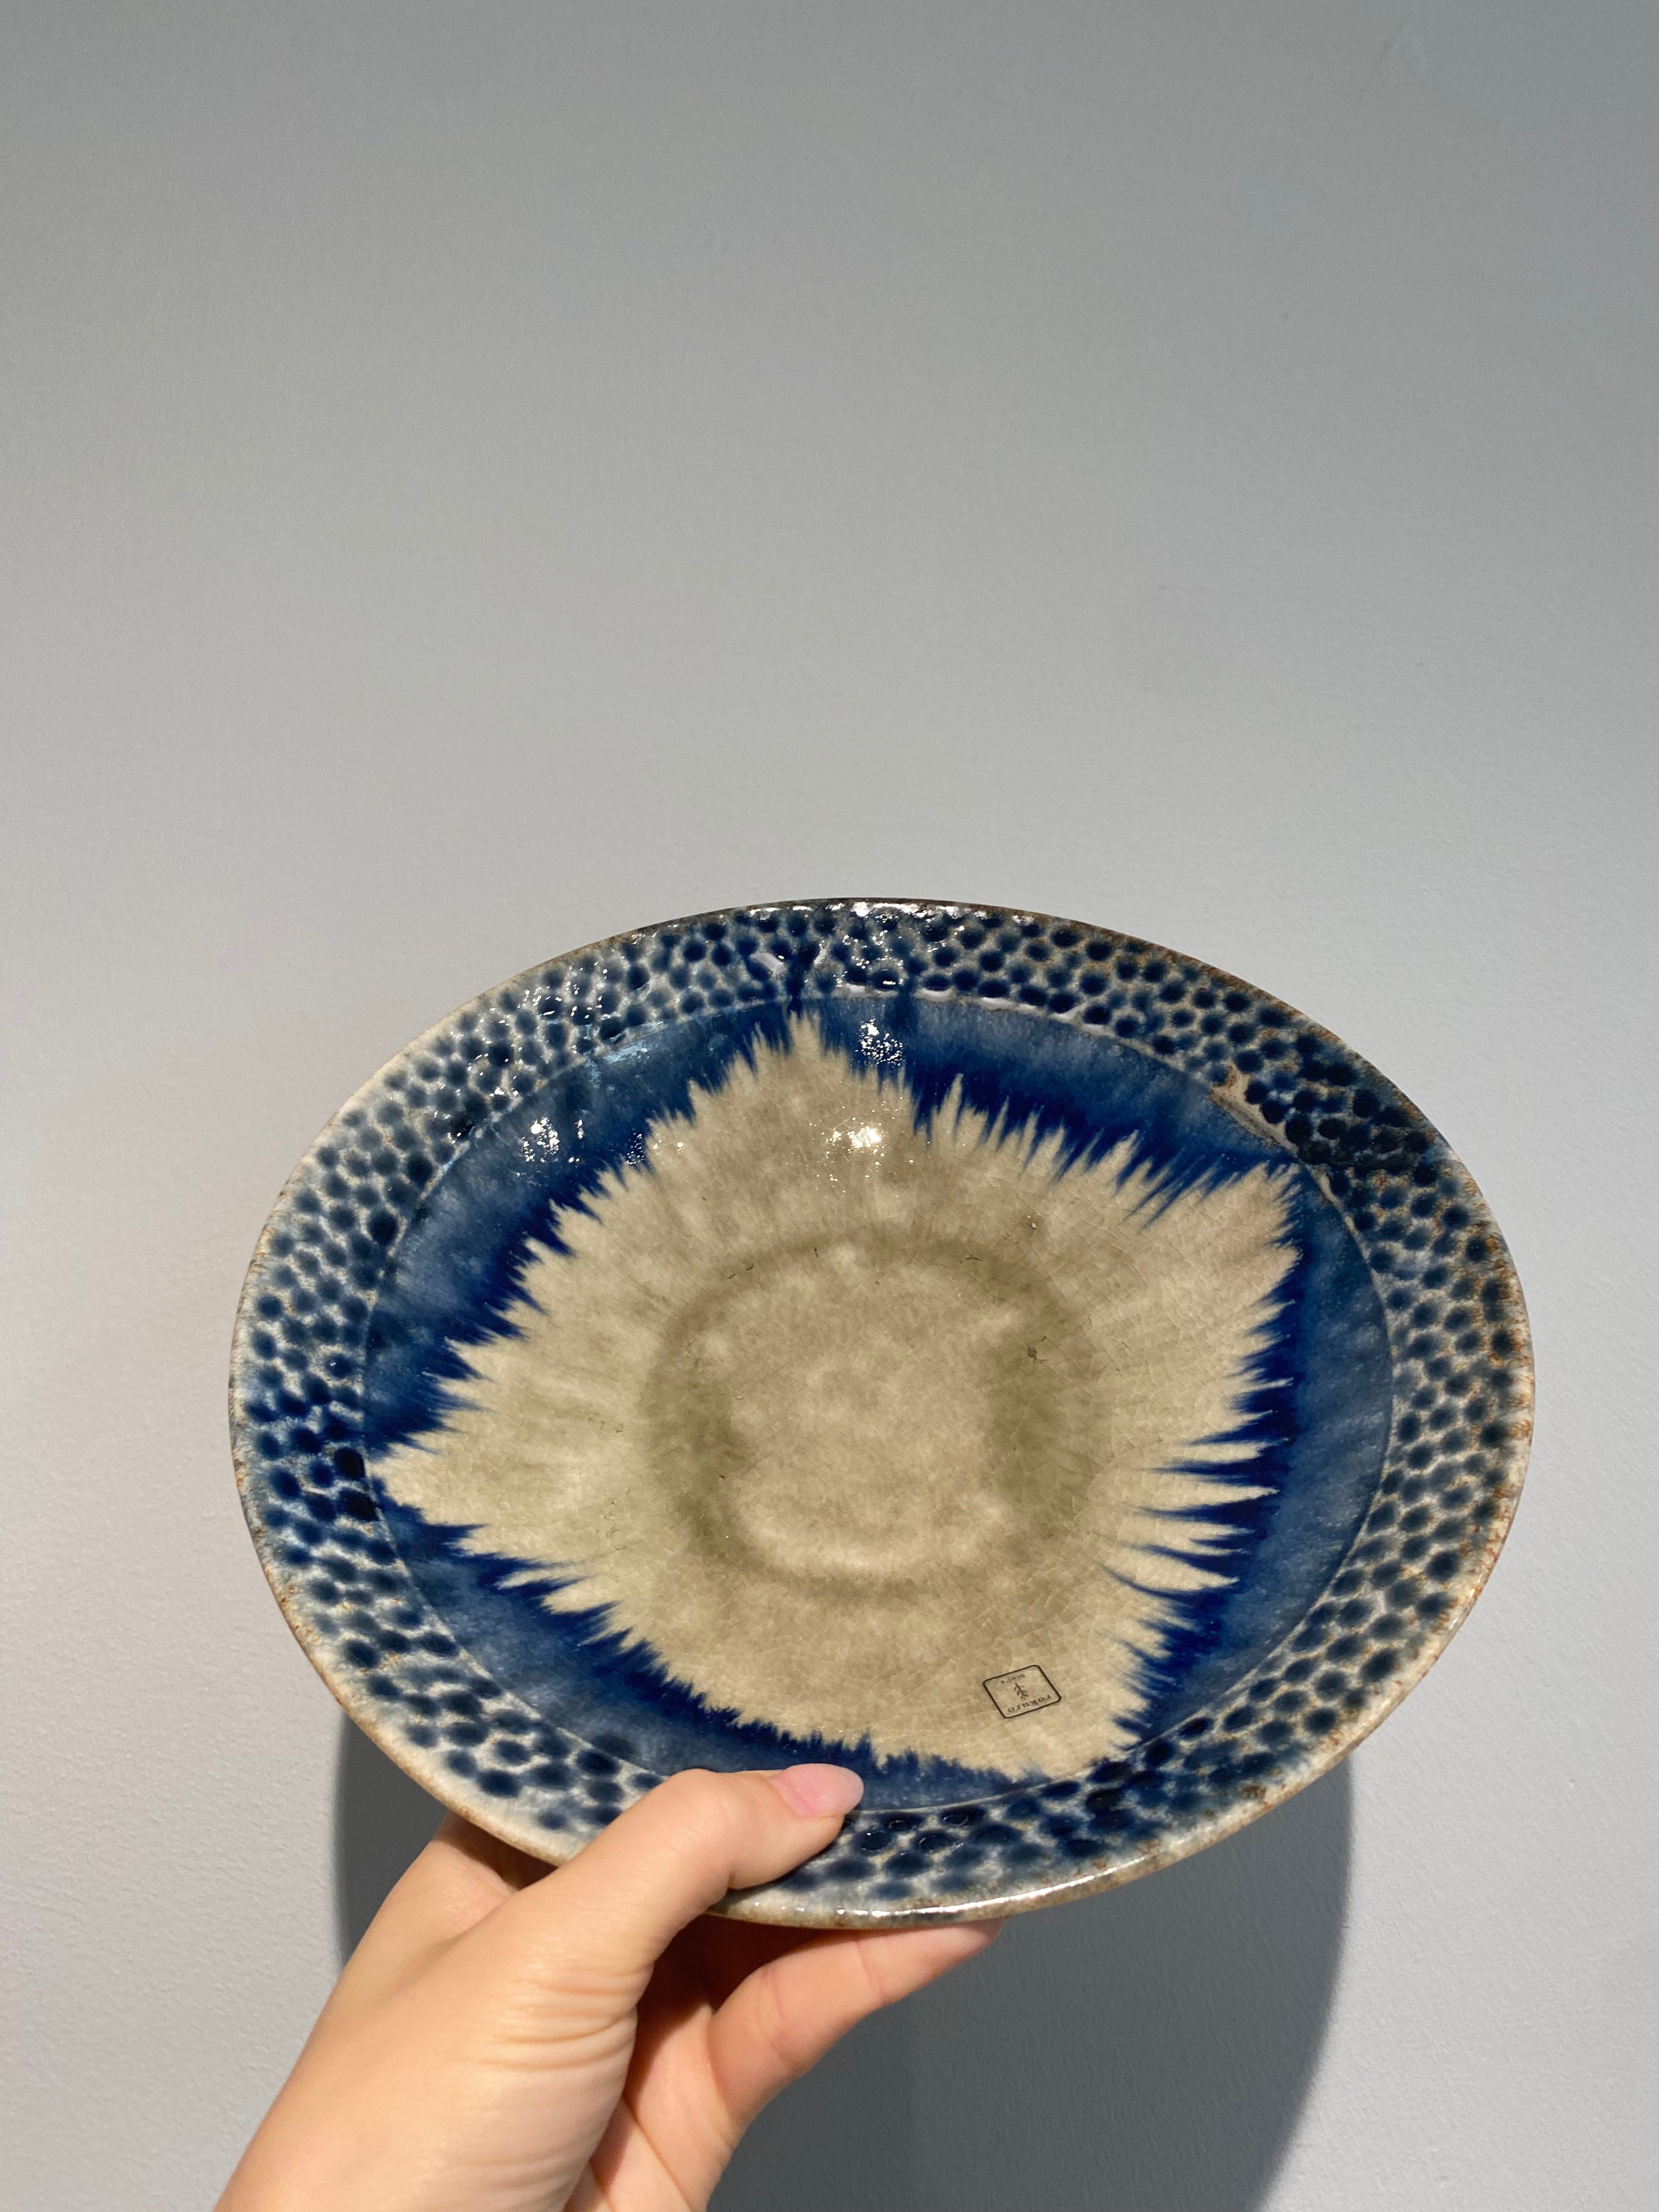 Large dish with greyish glaze and blue dots and details